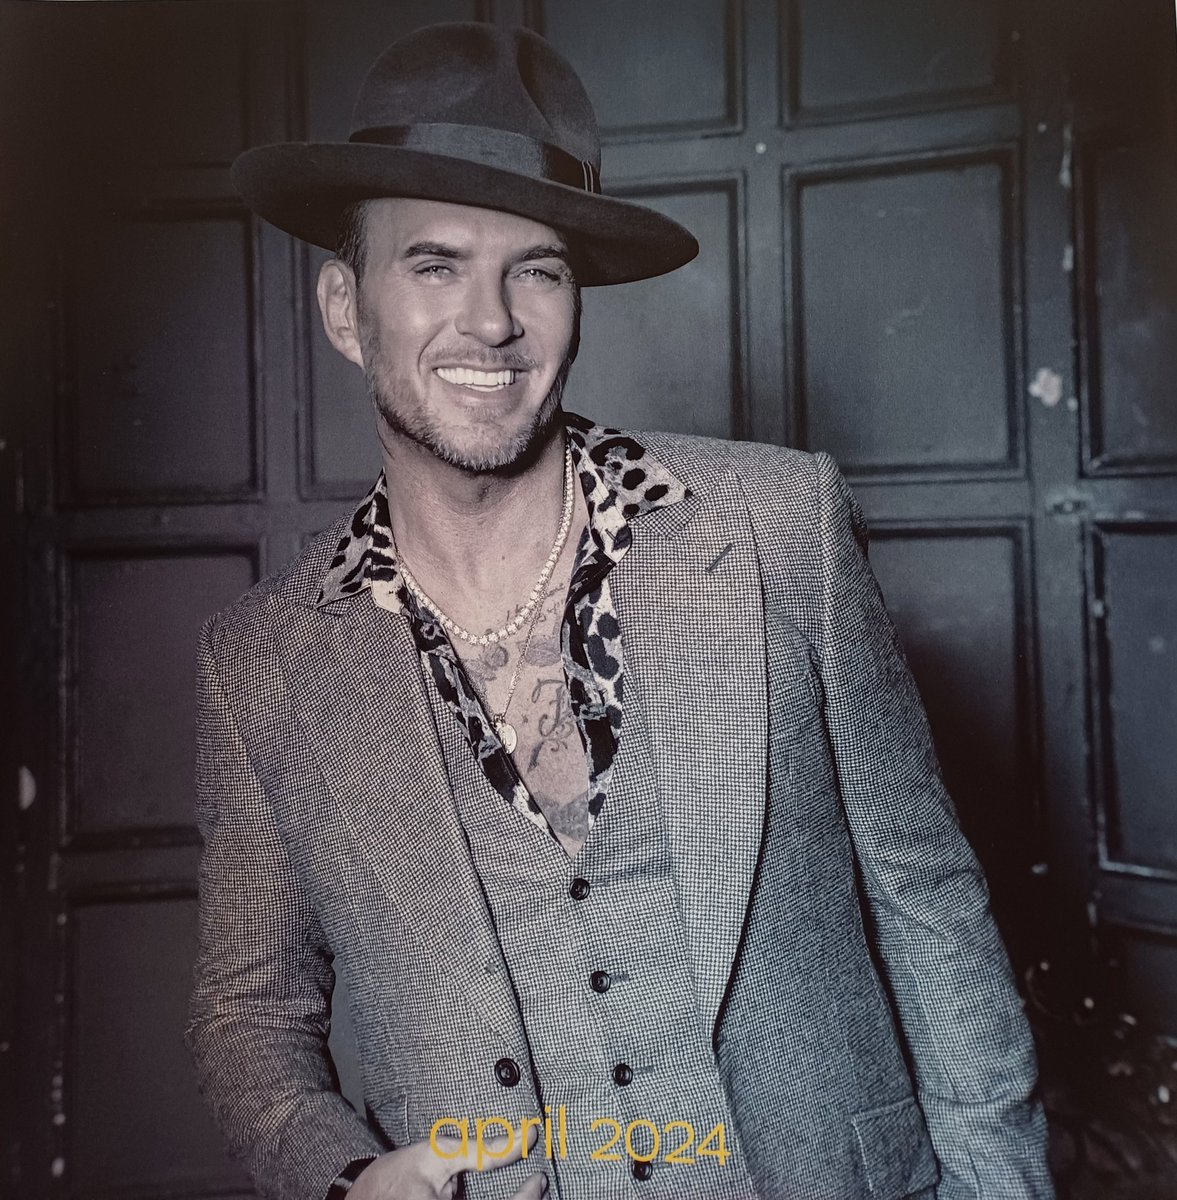 Turning the page over to this beautiful smile has started my April off well, @mattgoss ! 😍💜 @TeamMattGoss